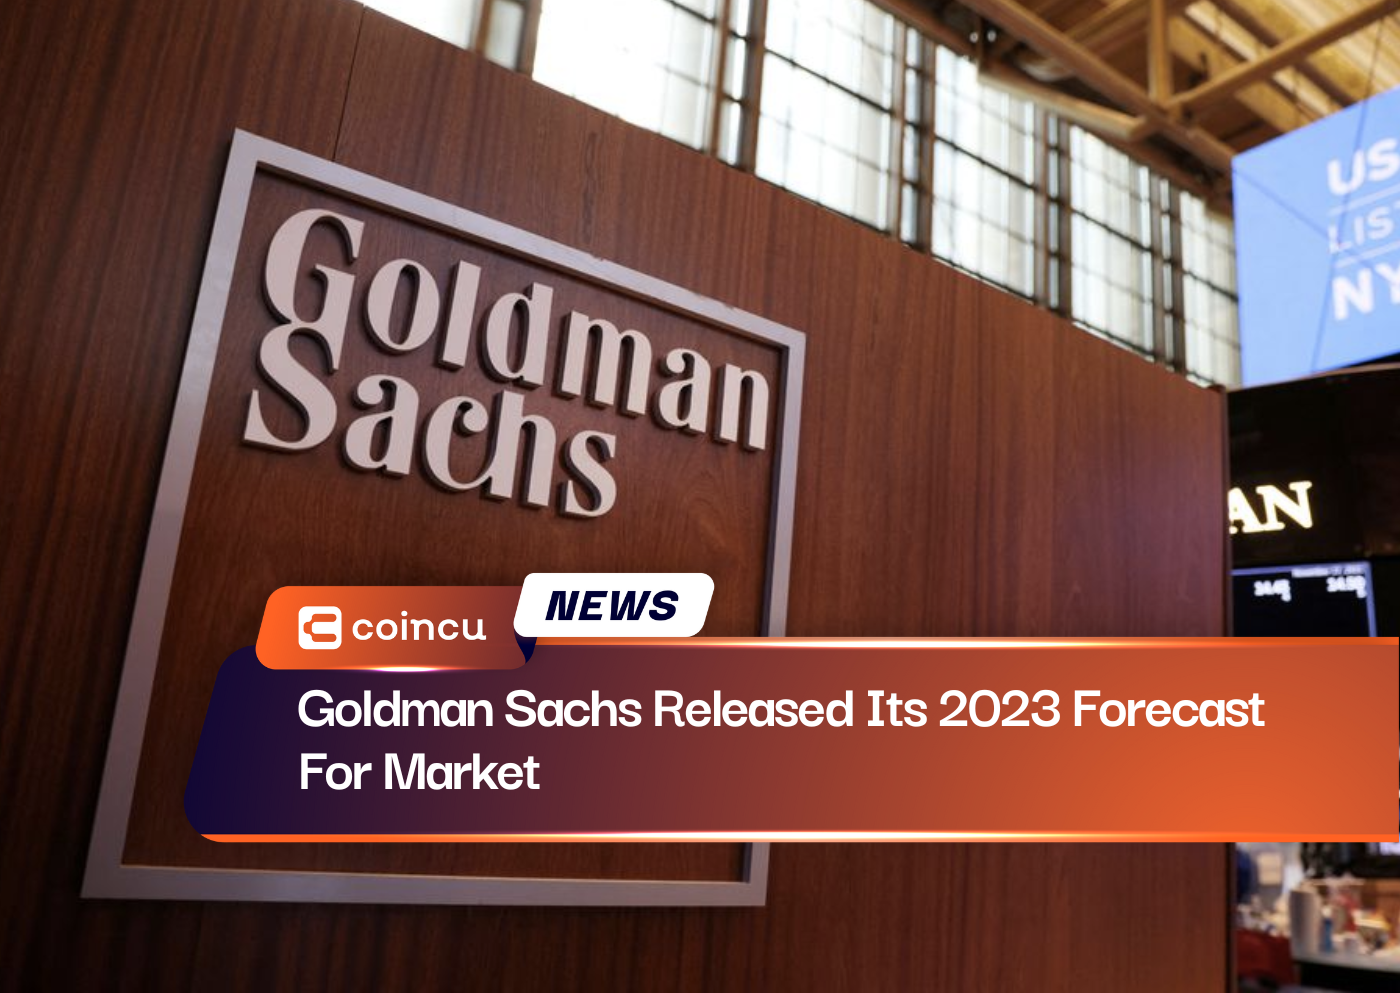 Goldman Sachs Released Its 2023 Forecast For Market